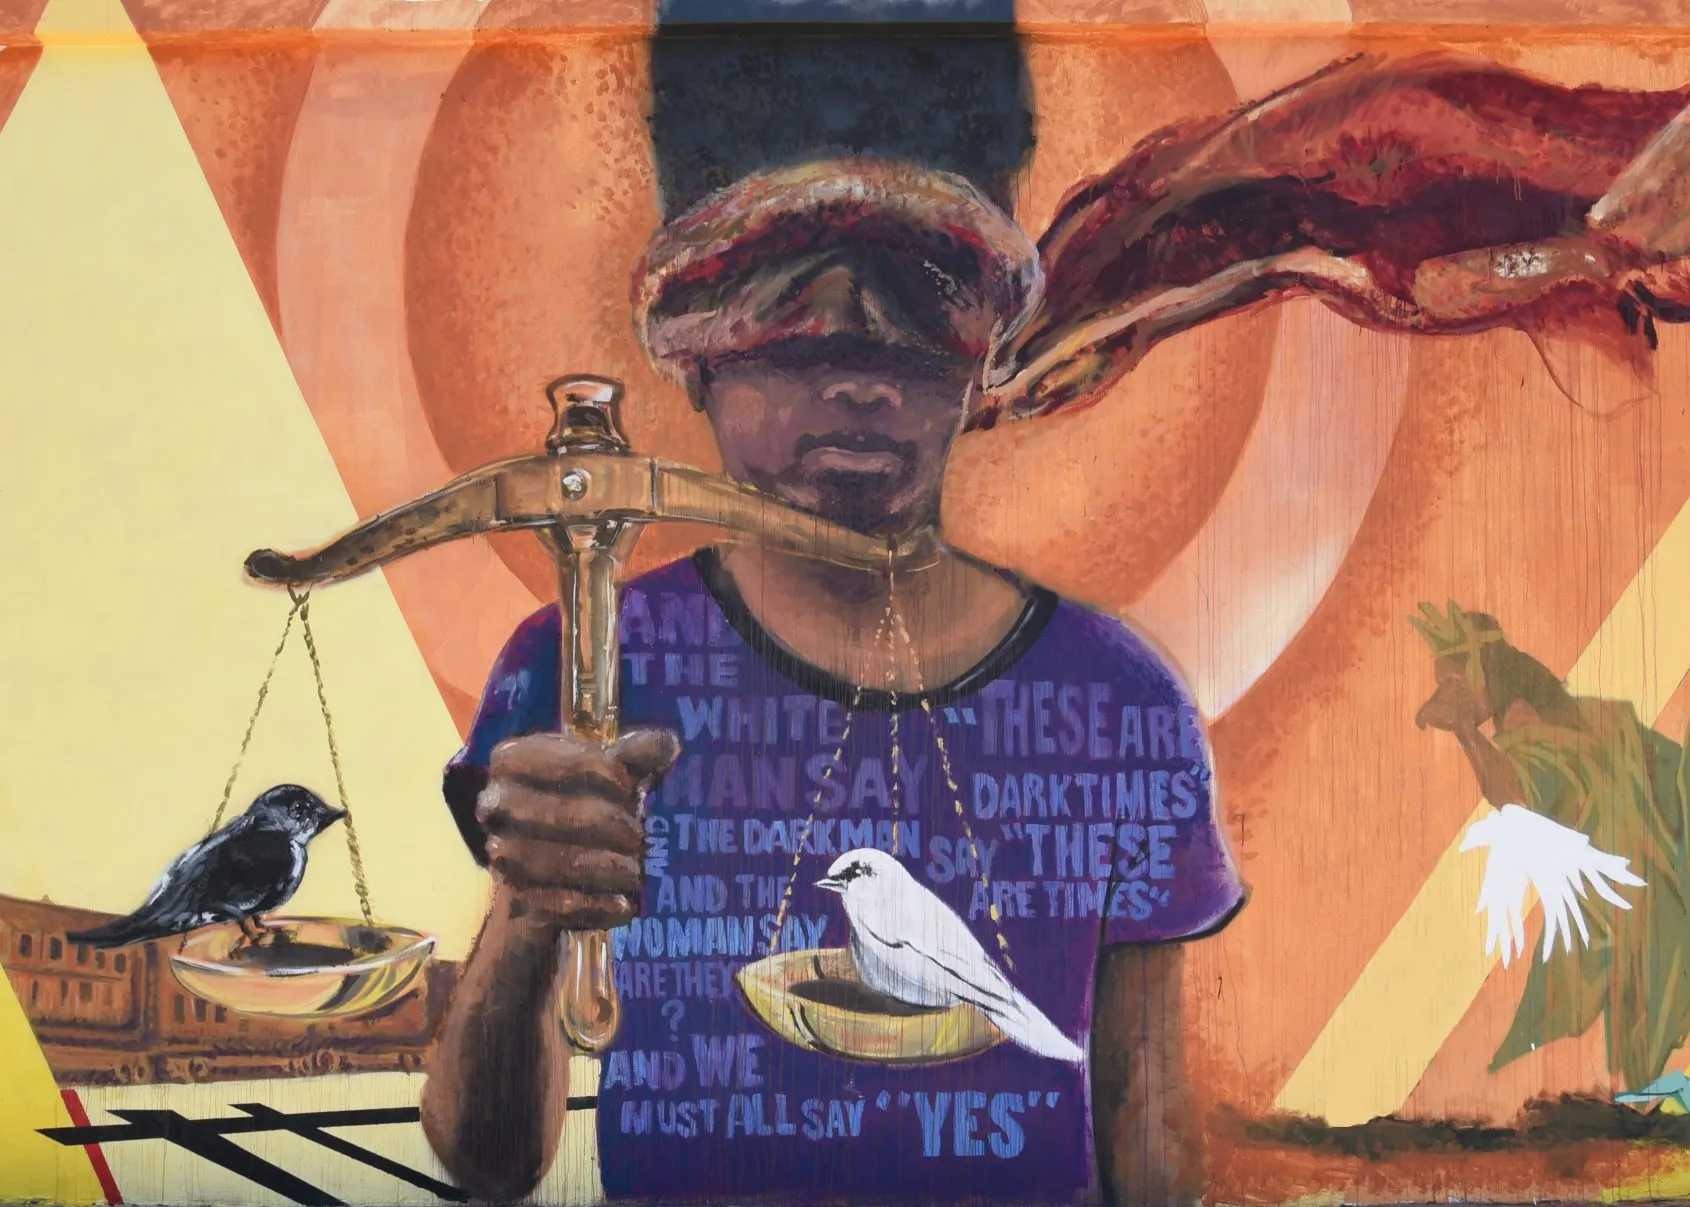 Plessy-Mural-5-7-18-145-pm-less-liberty-ccc_5376.png